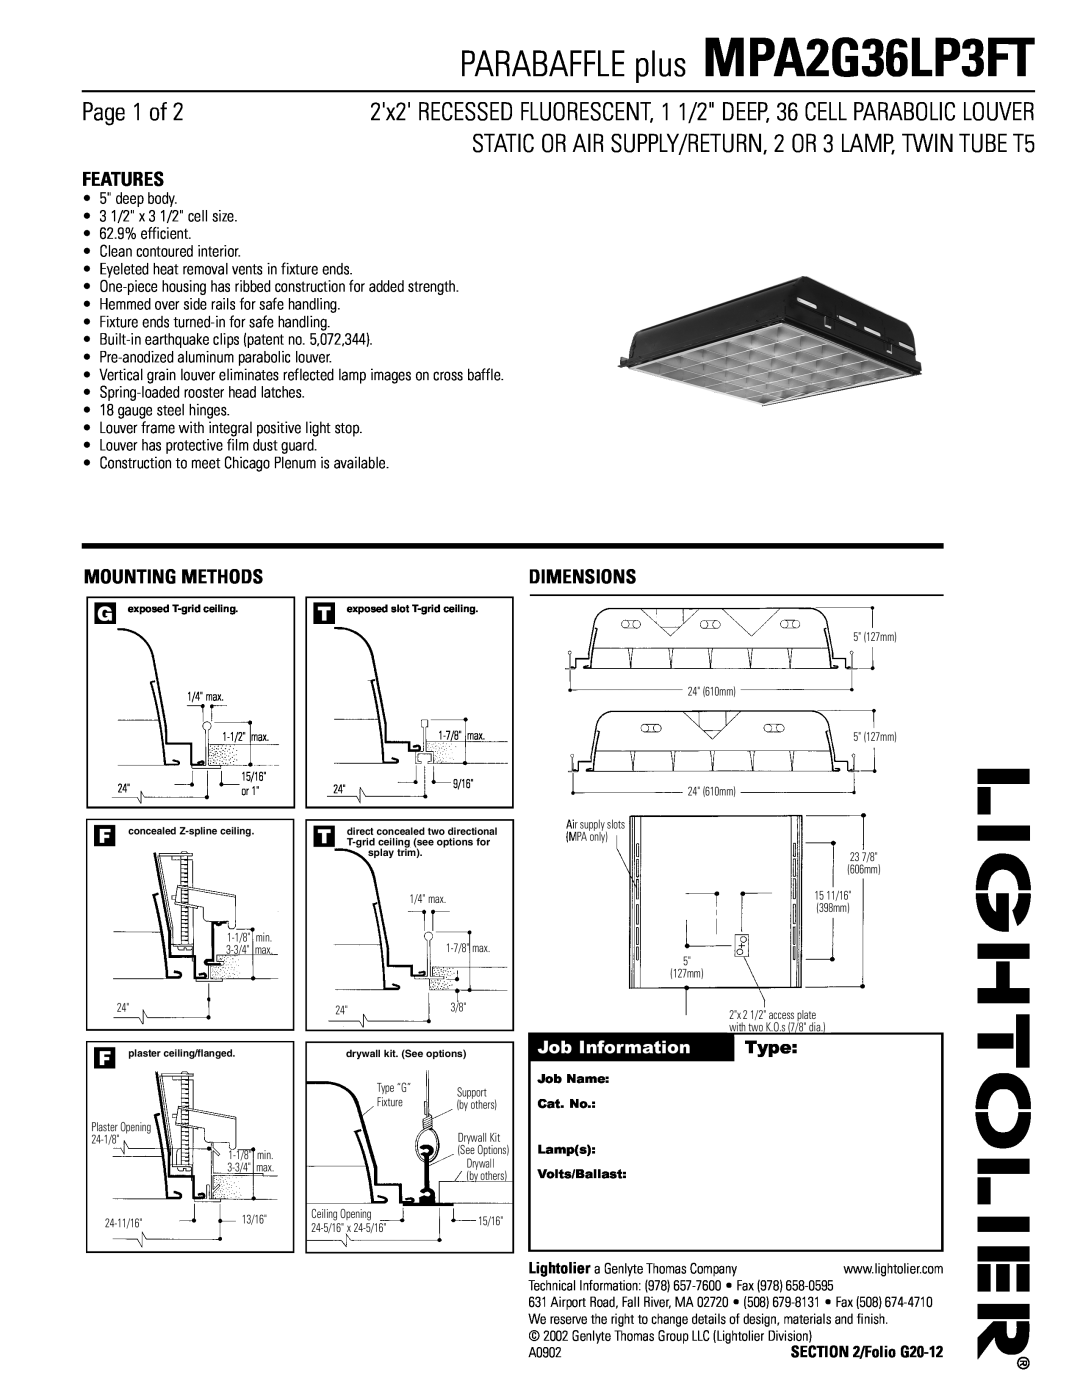 Lightolier MPA2G36LP3FT dimensions Page 1 of, Features, Mounting Methods, Dimensions, Job Information, Type 